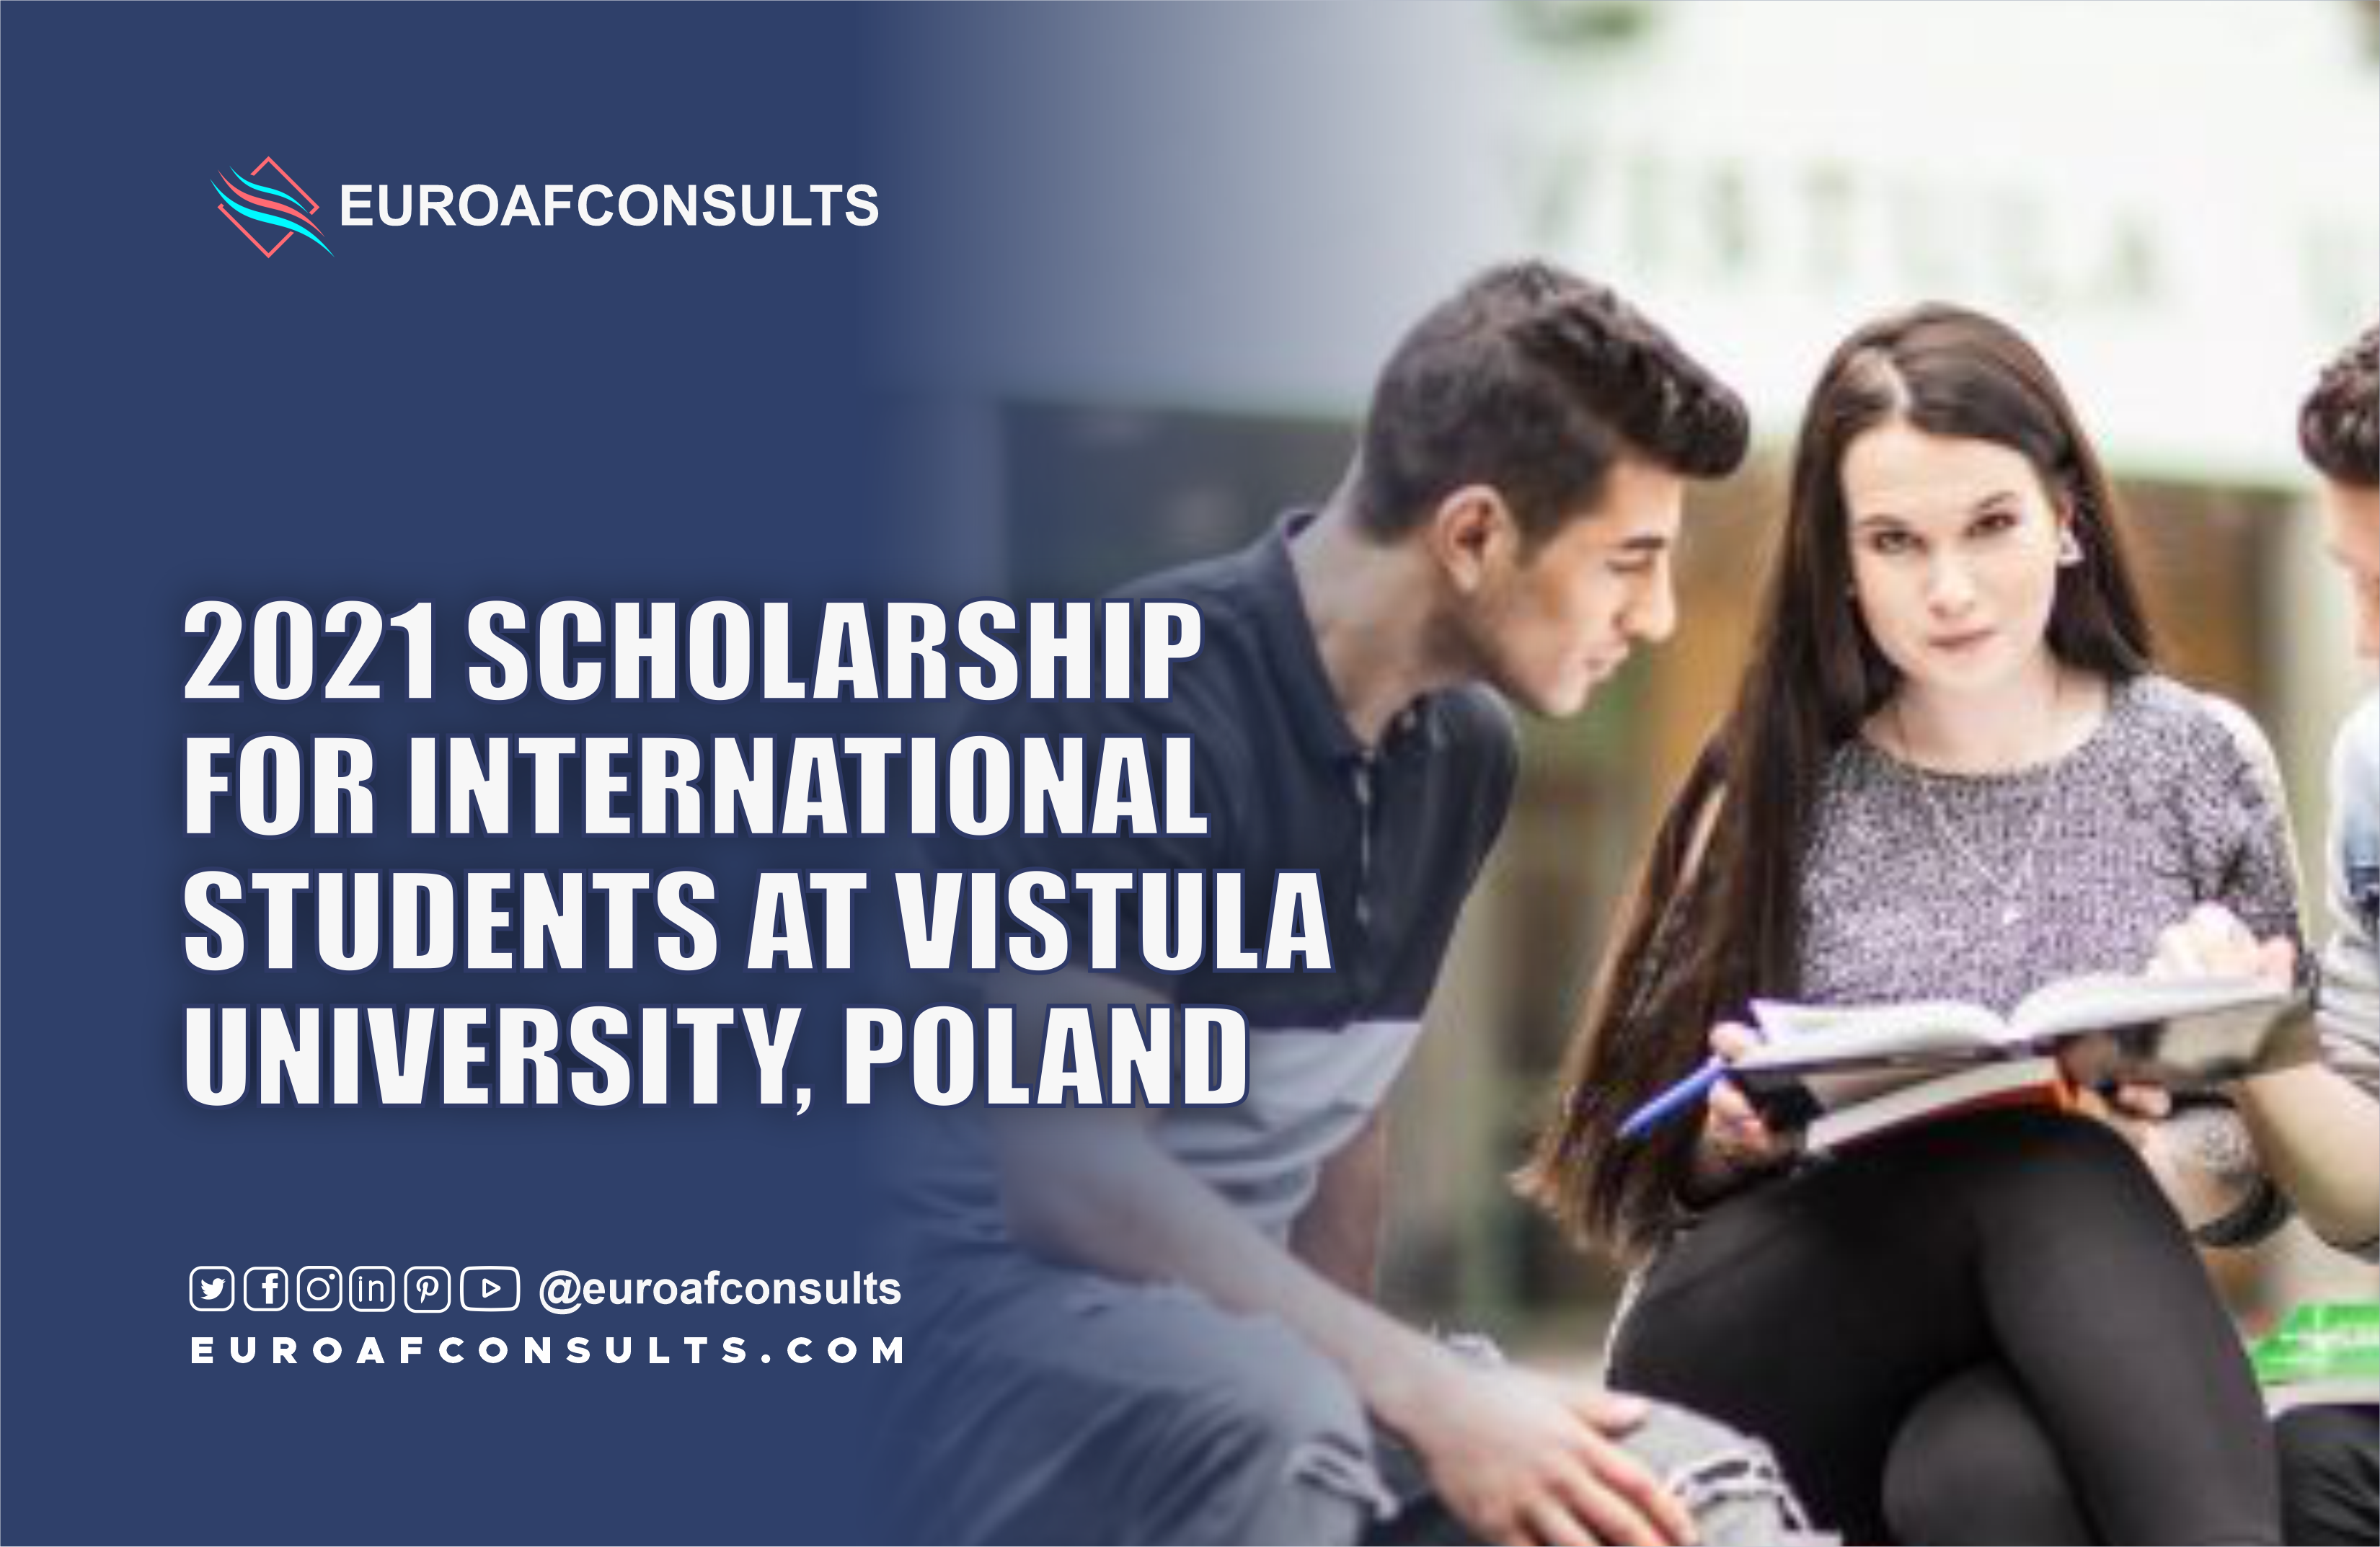 You are currently viewing 2022 SCHOLARSHIP FOR INTERNATIONAL STUDENTS AT VISTULA UNIVERSITY, POLAND